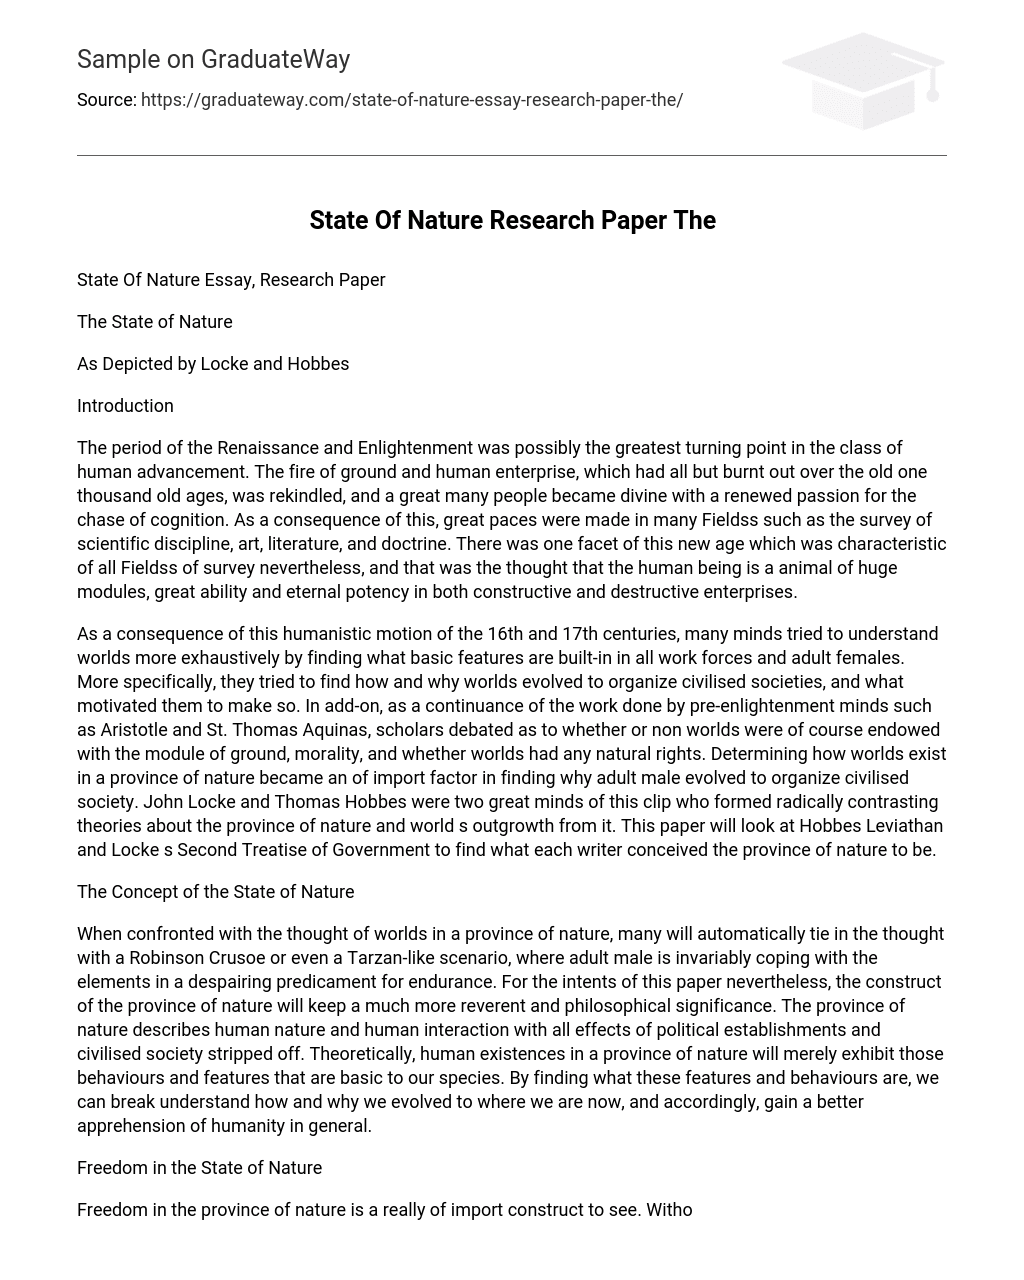 State Of Nature Research Paper The